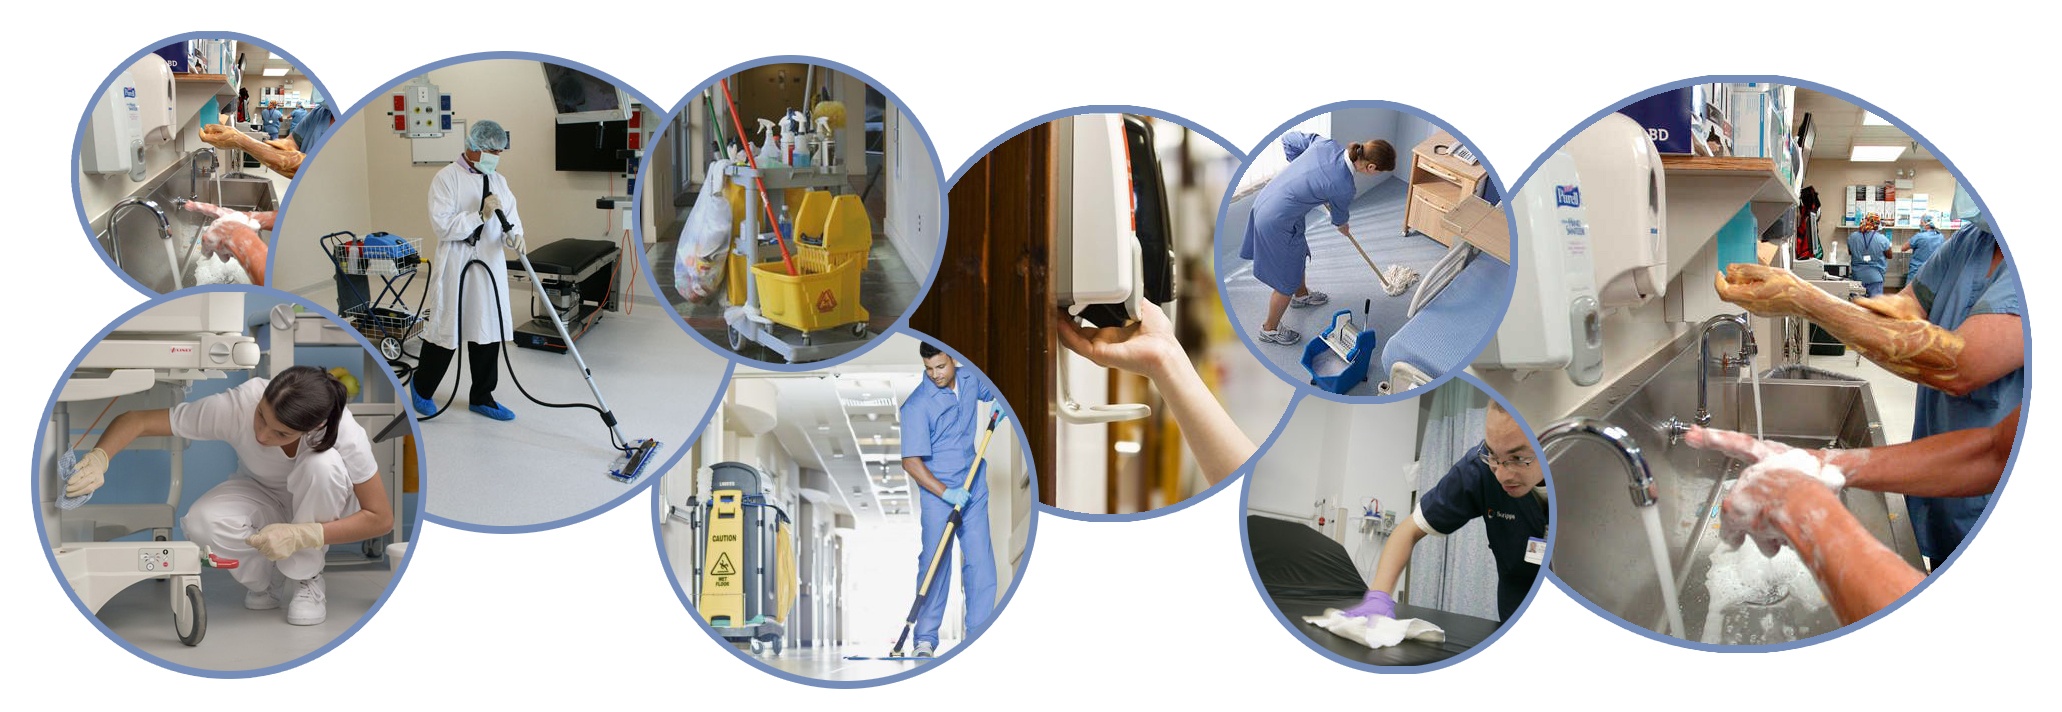 varies images of workers cleaning hospital